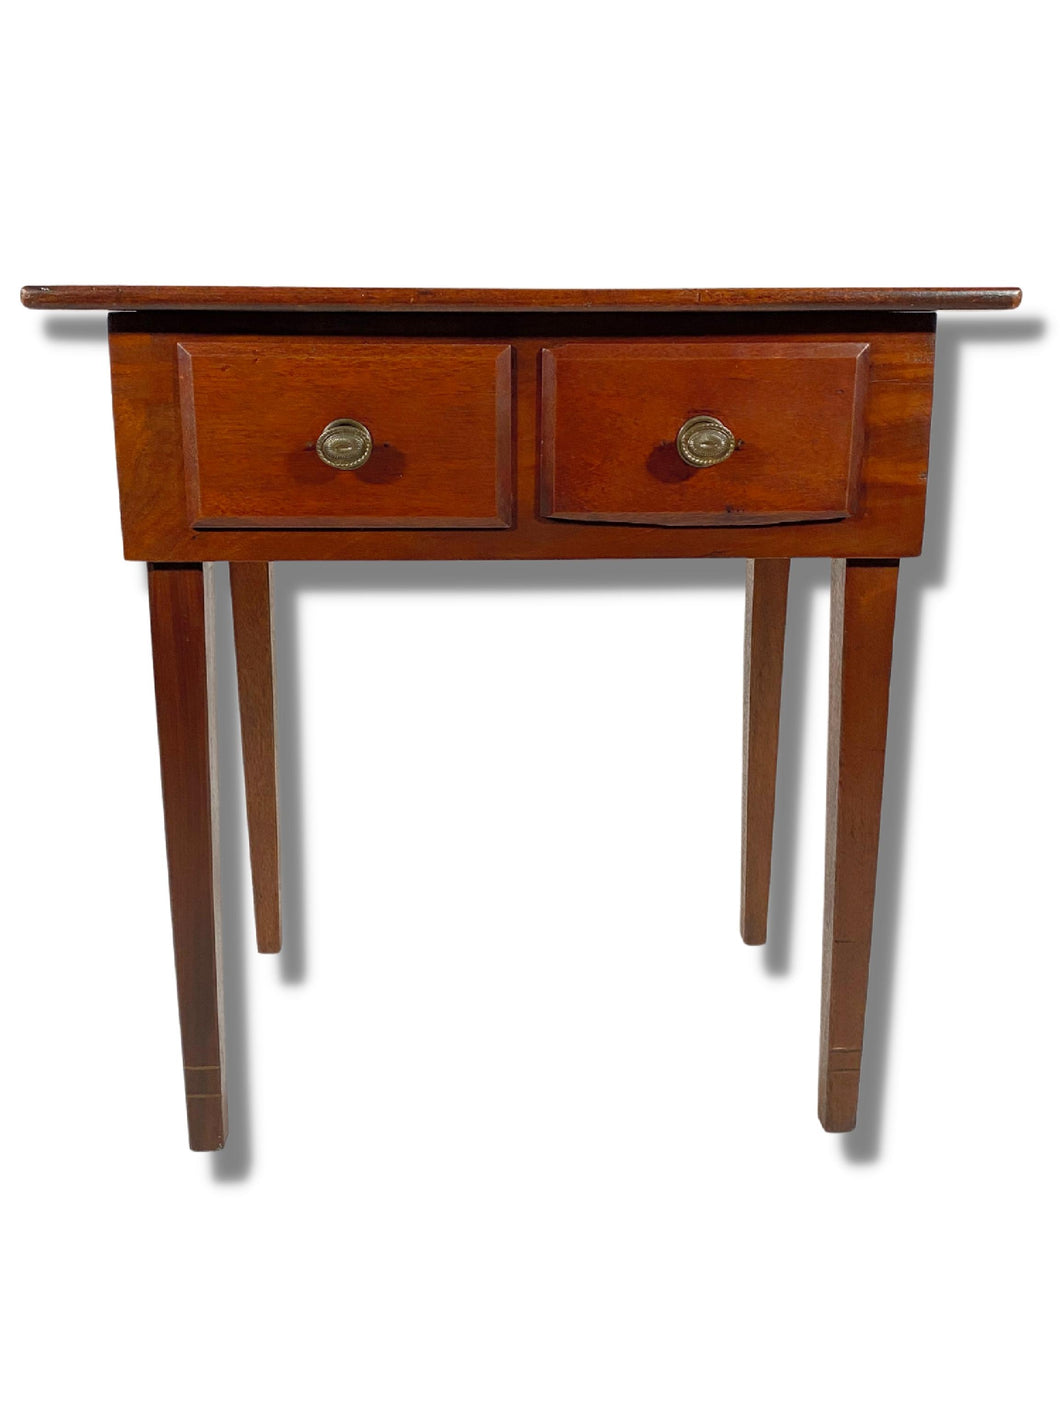 19th c. Wash Stand with Drawers